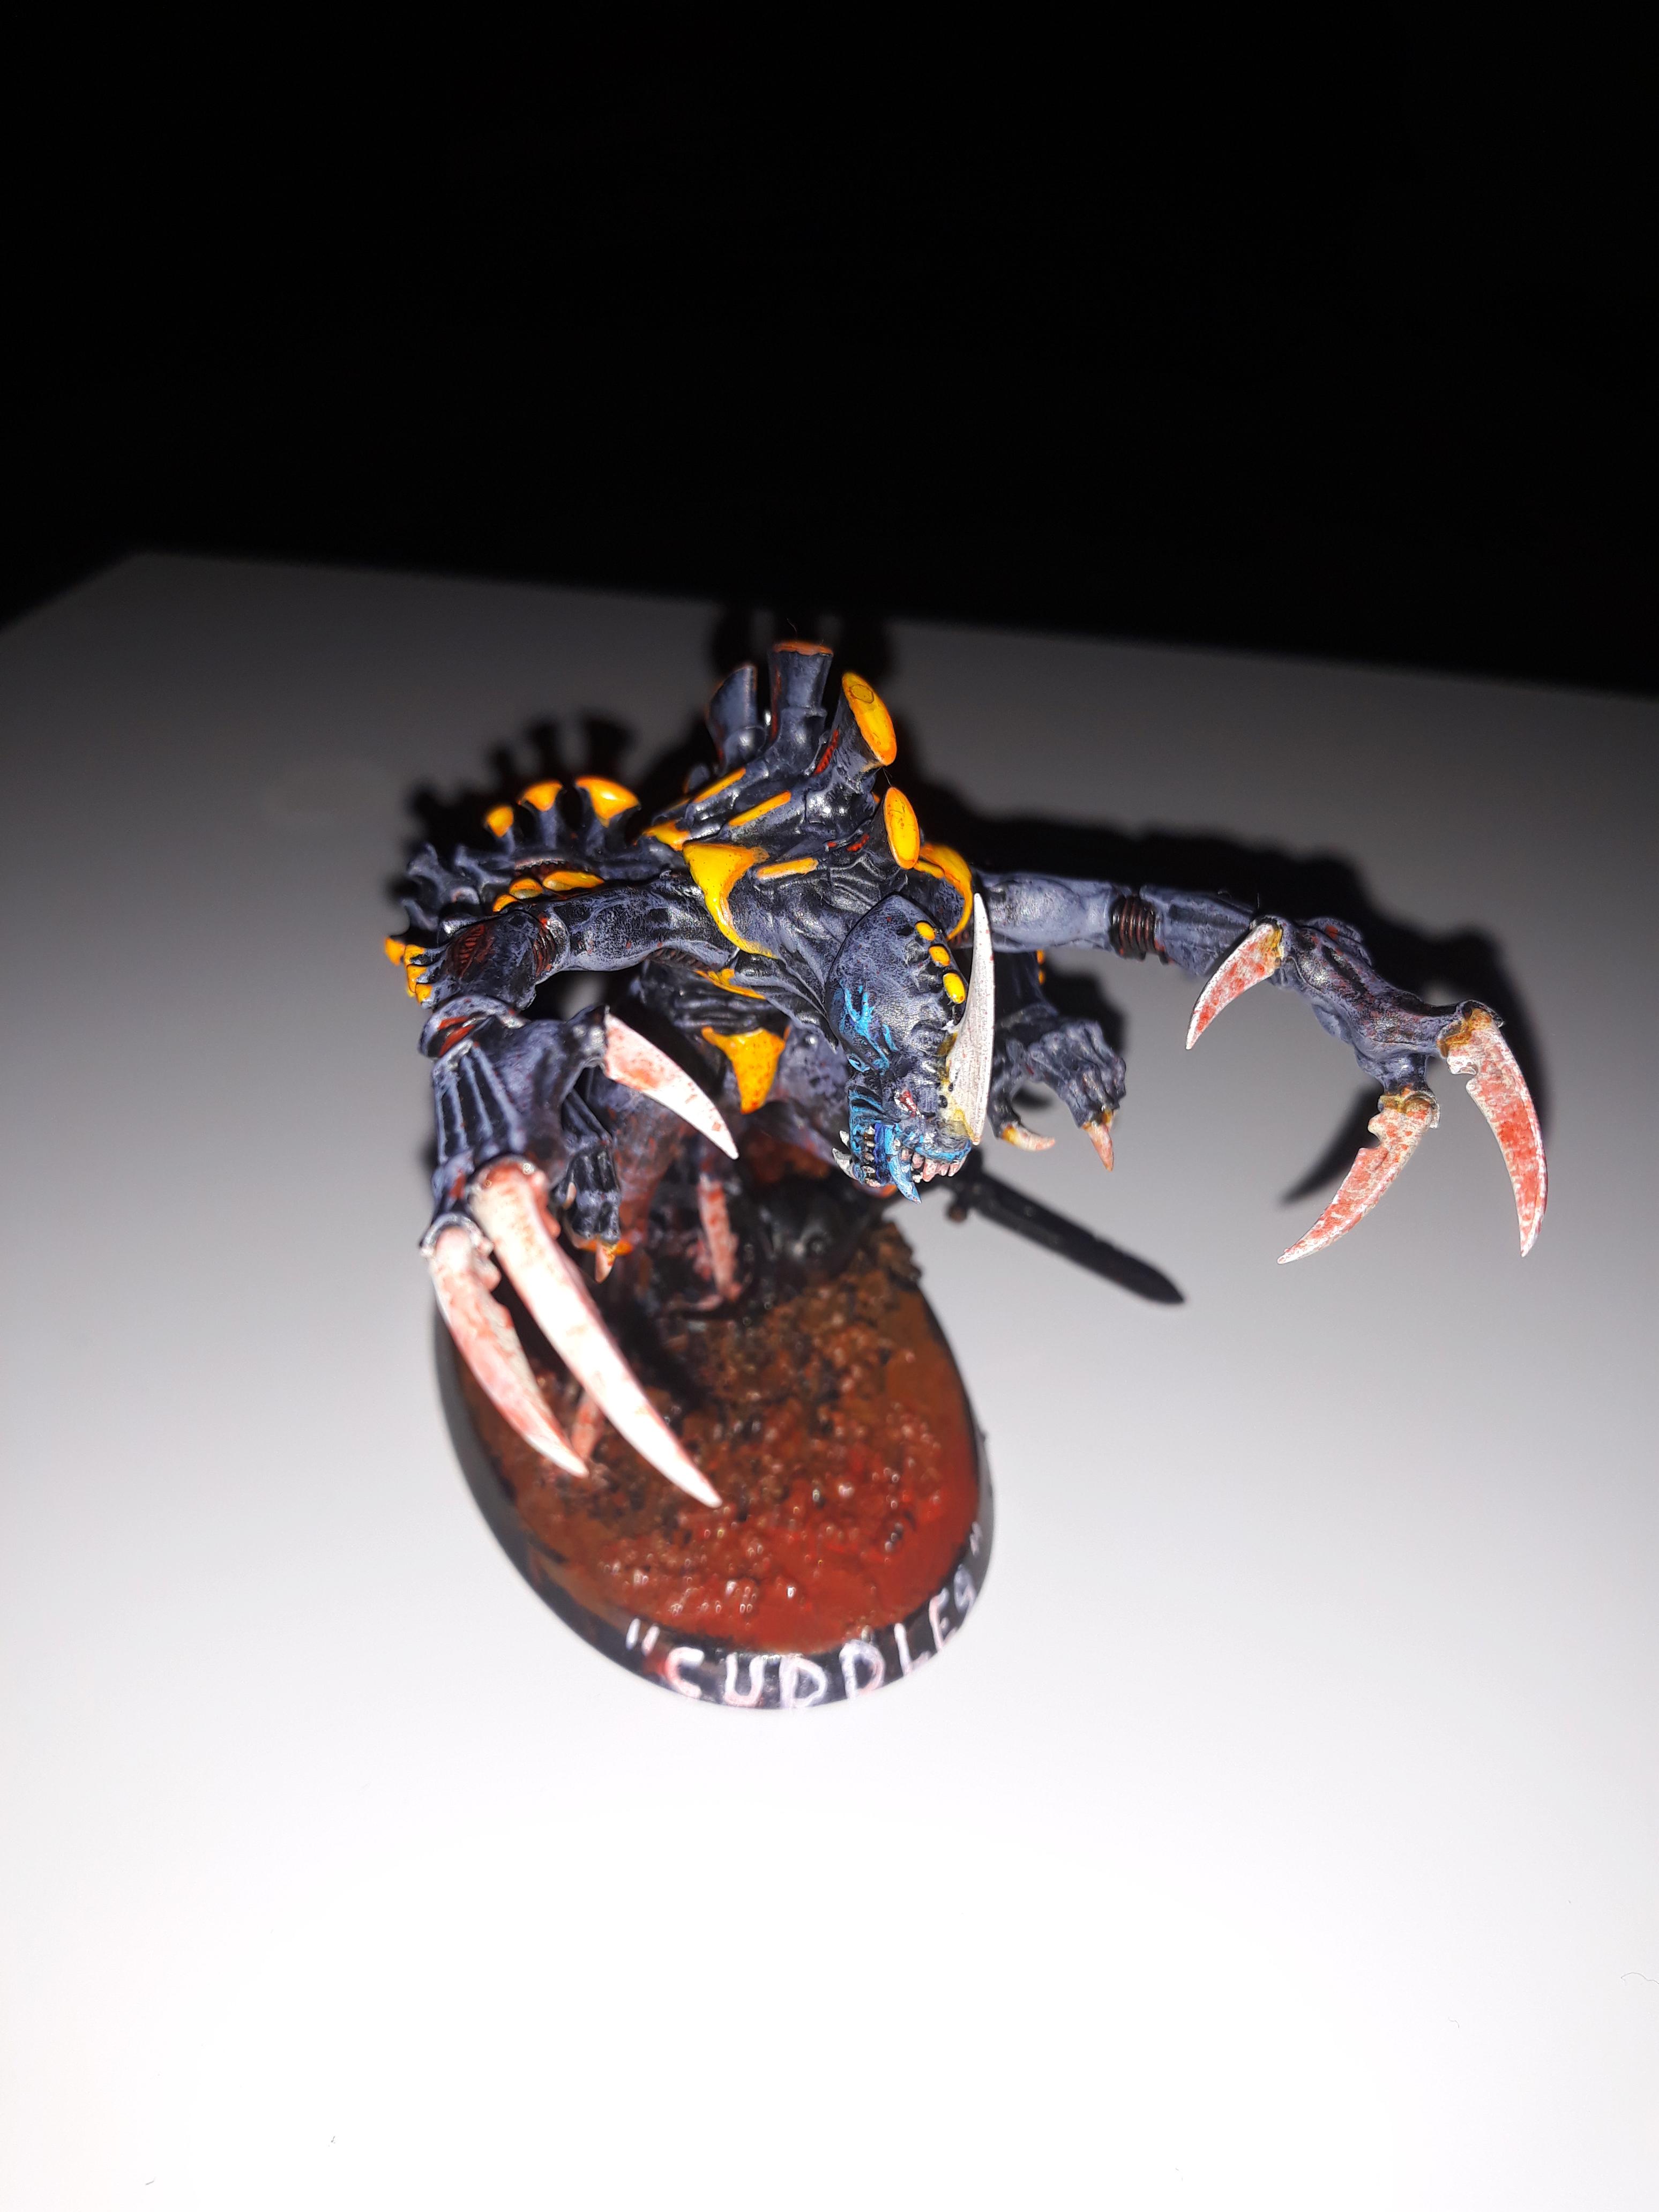 Broodlord, Tyranids, Broodlord &quot;Cuddles&quot;